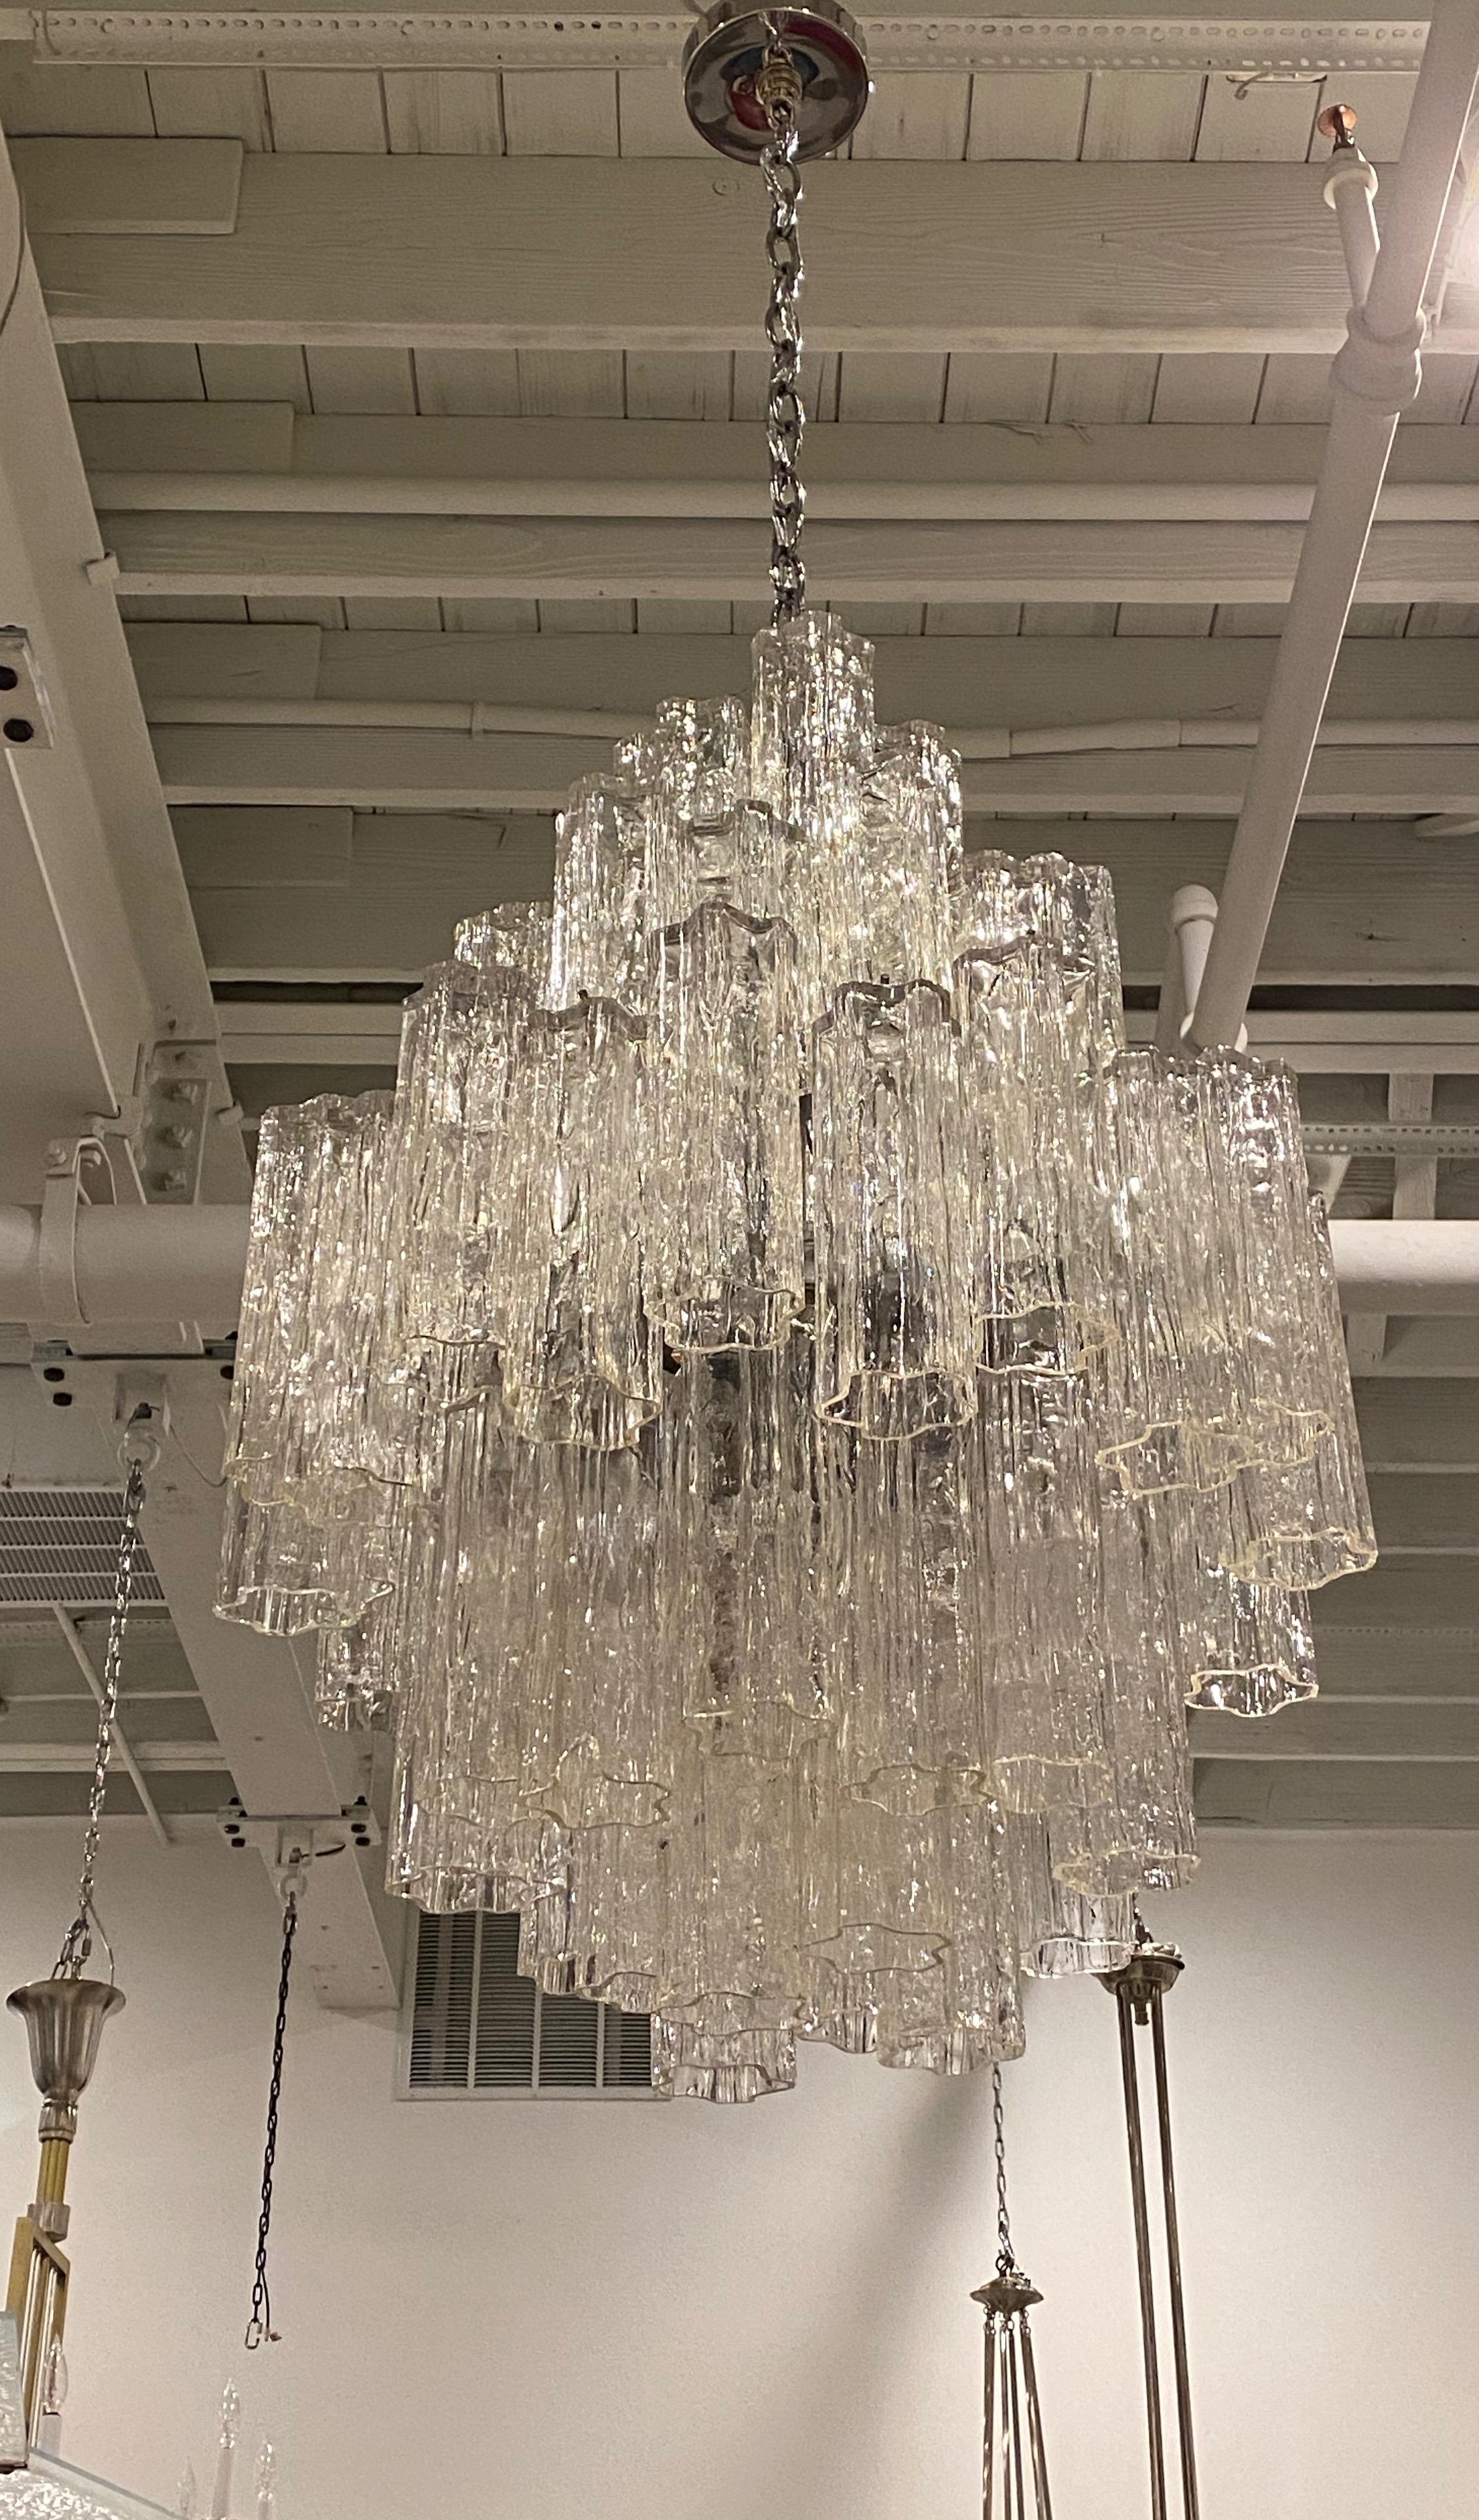 Mid-Century Modern tiered round chandelier. Consisting of tronchi cylindrical glass pieces. Each piece is hand blown and has a star or floral shape. The glass tronchi hangs from a nickel (silver) frame as pictured. Any amount of chain can be added